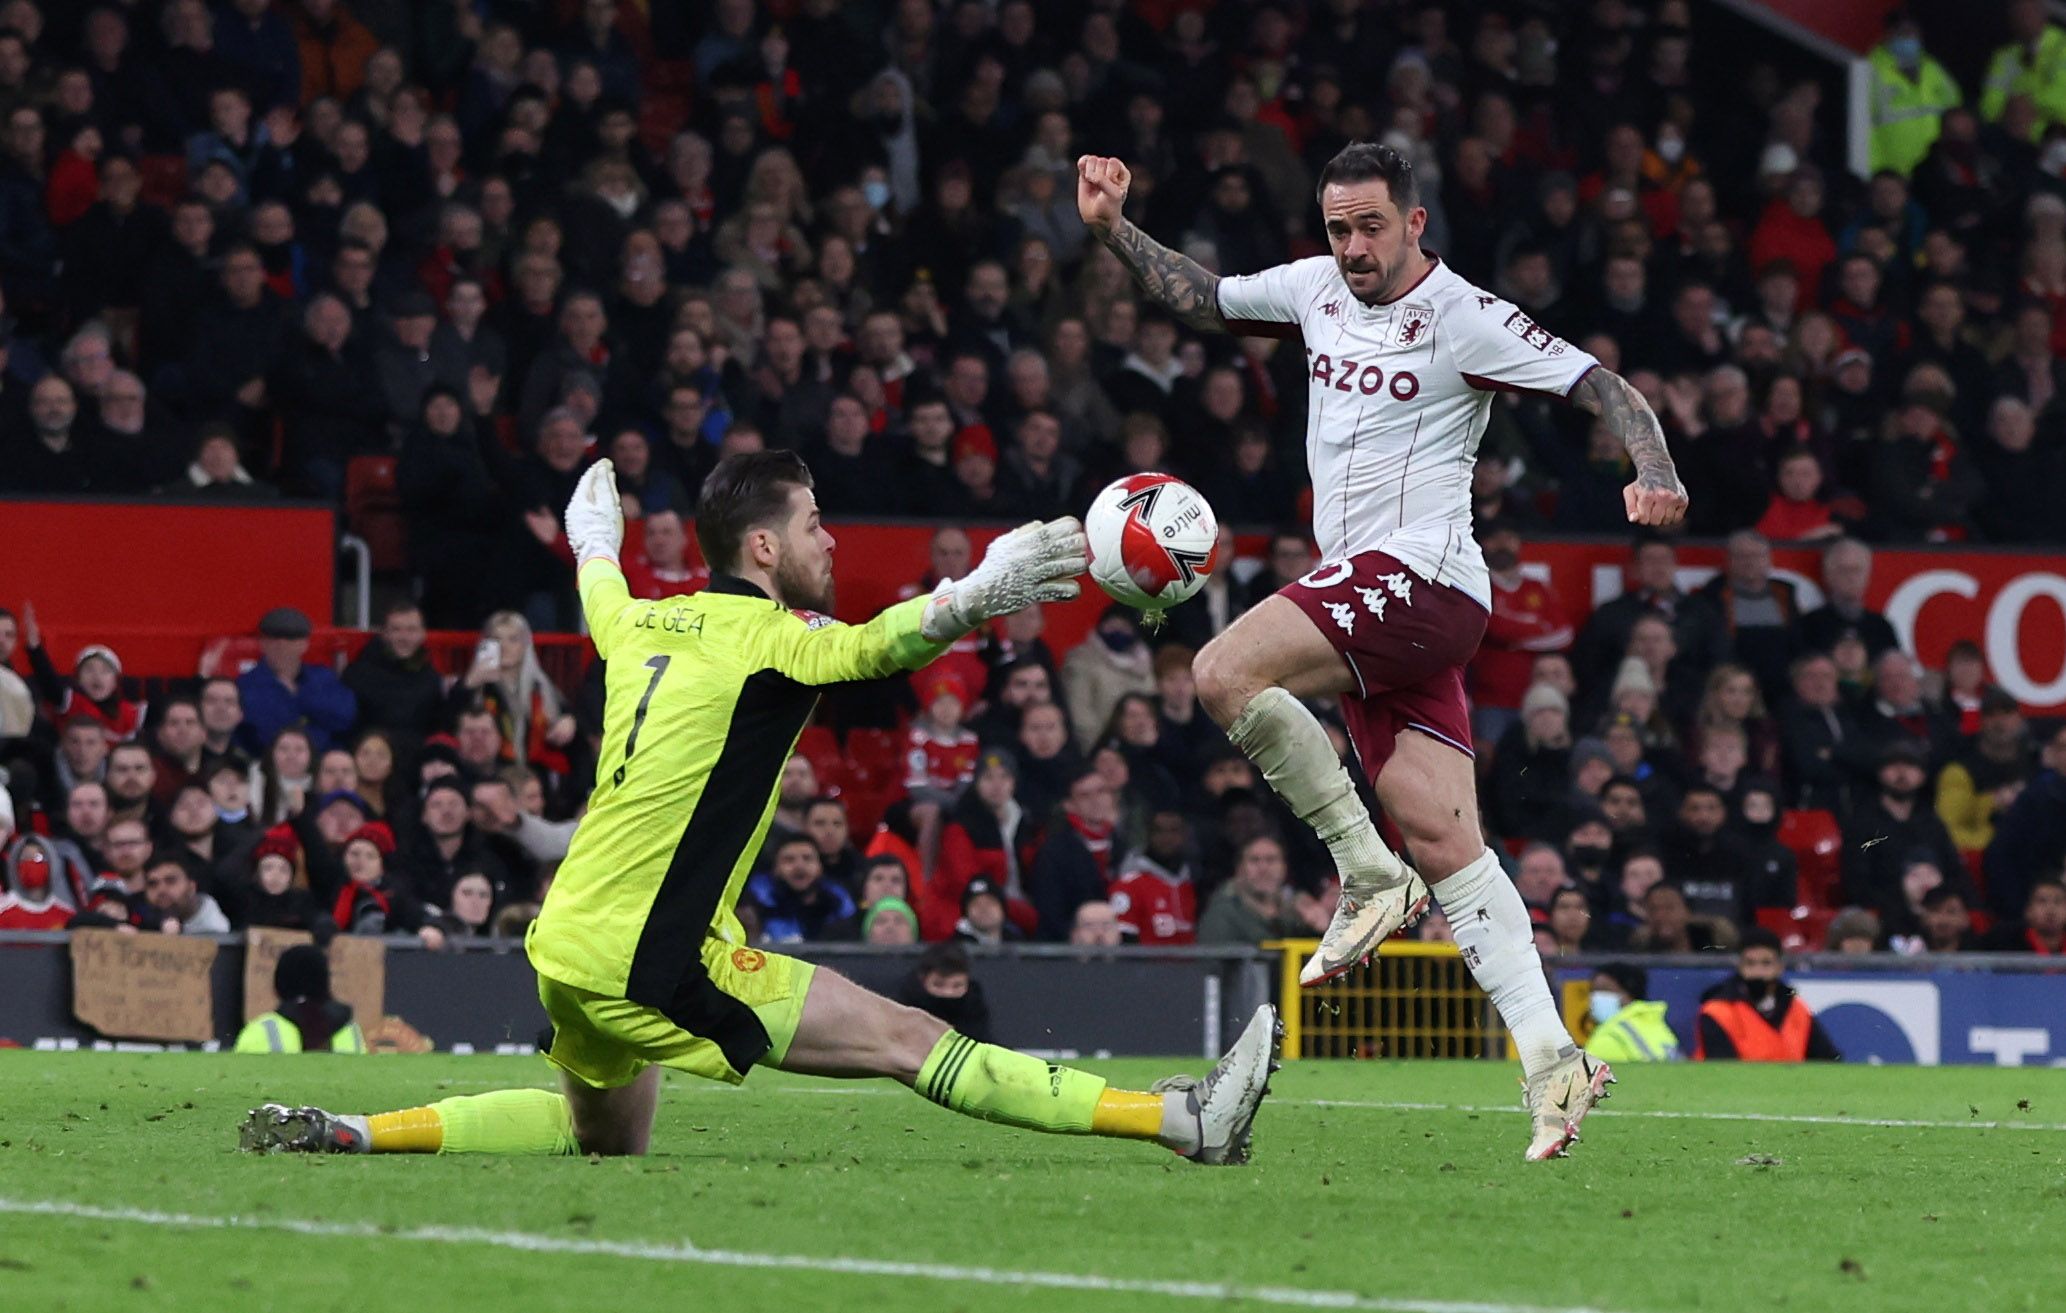 Soccer Football - FA Cup Third Round - Manchester United v Aston Villa - Old Trafford, Manchester, Britain - January 10, 2022 Aston Villa's Danny Ings misses a chance to score REUTERS/Phil Noble